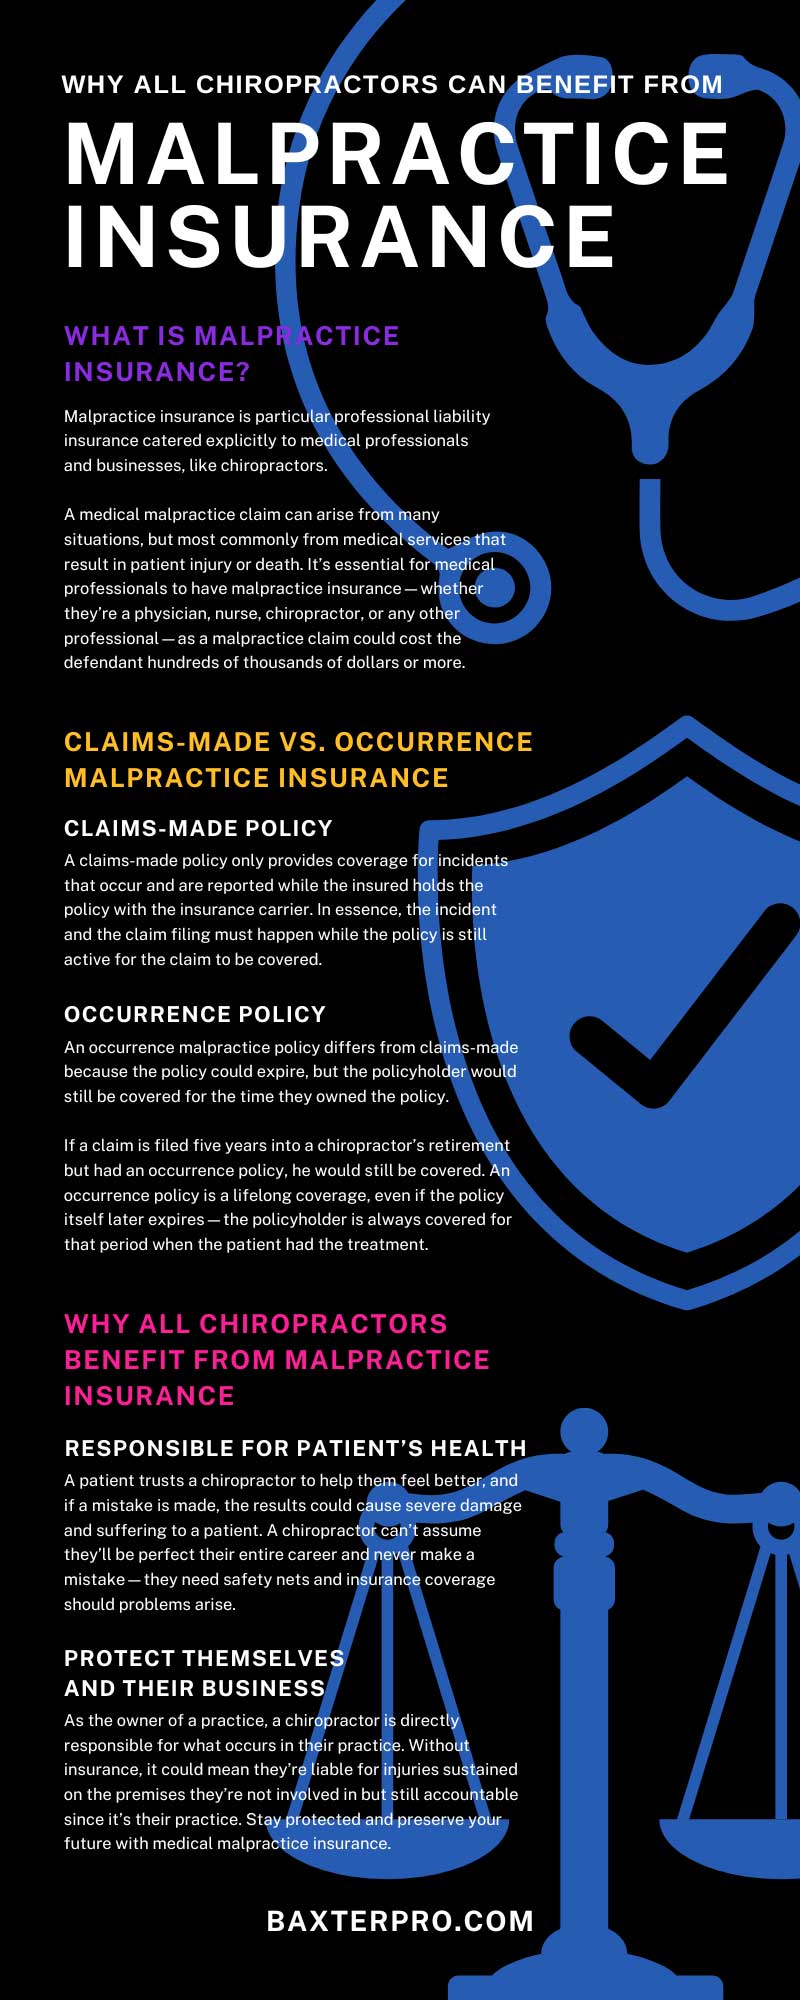 Why All Chiropractors Can Benefit From Malpractice Insurance